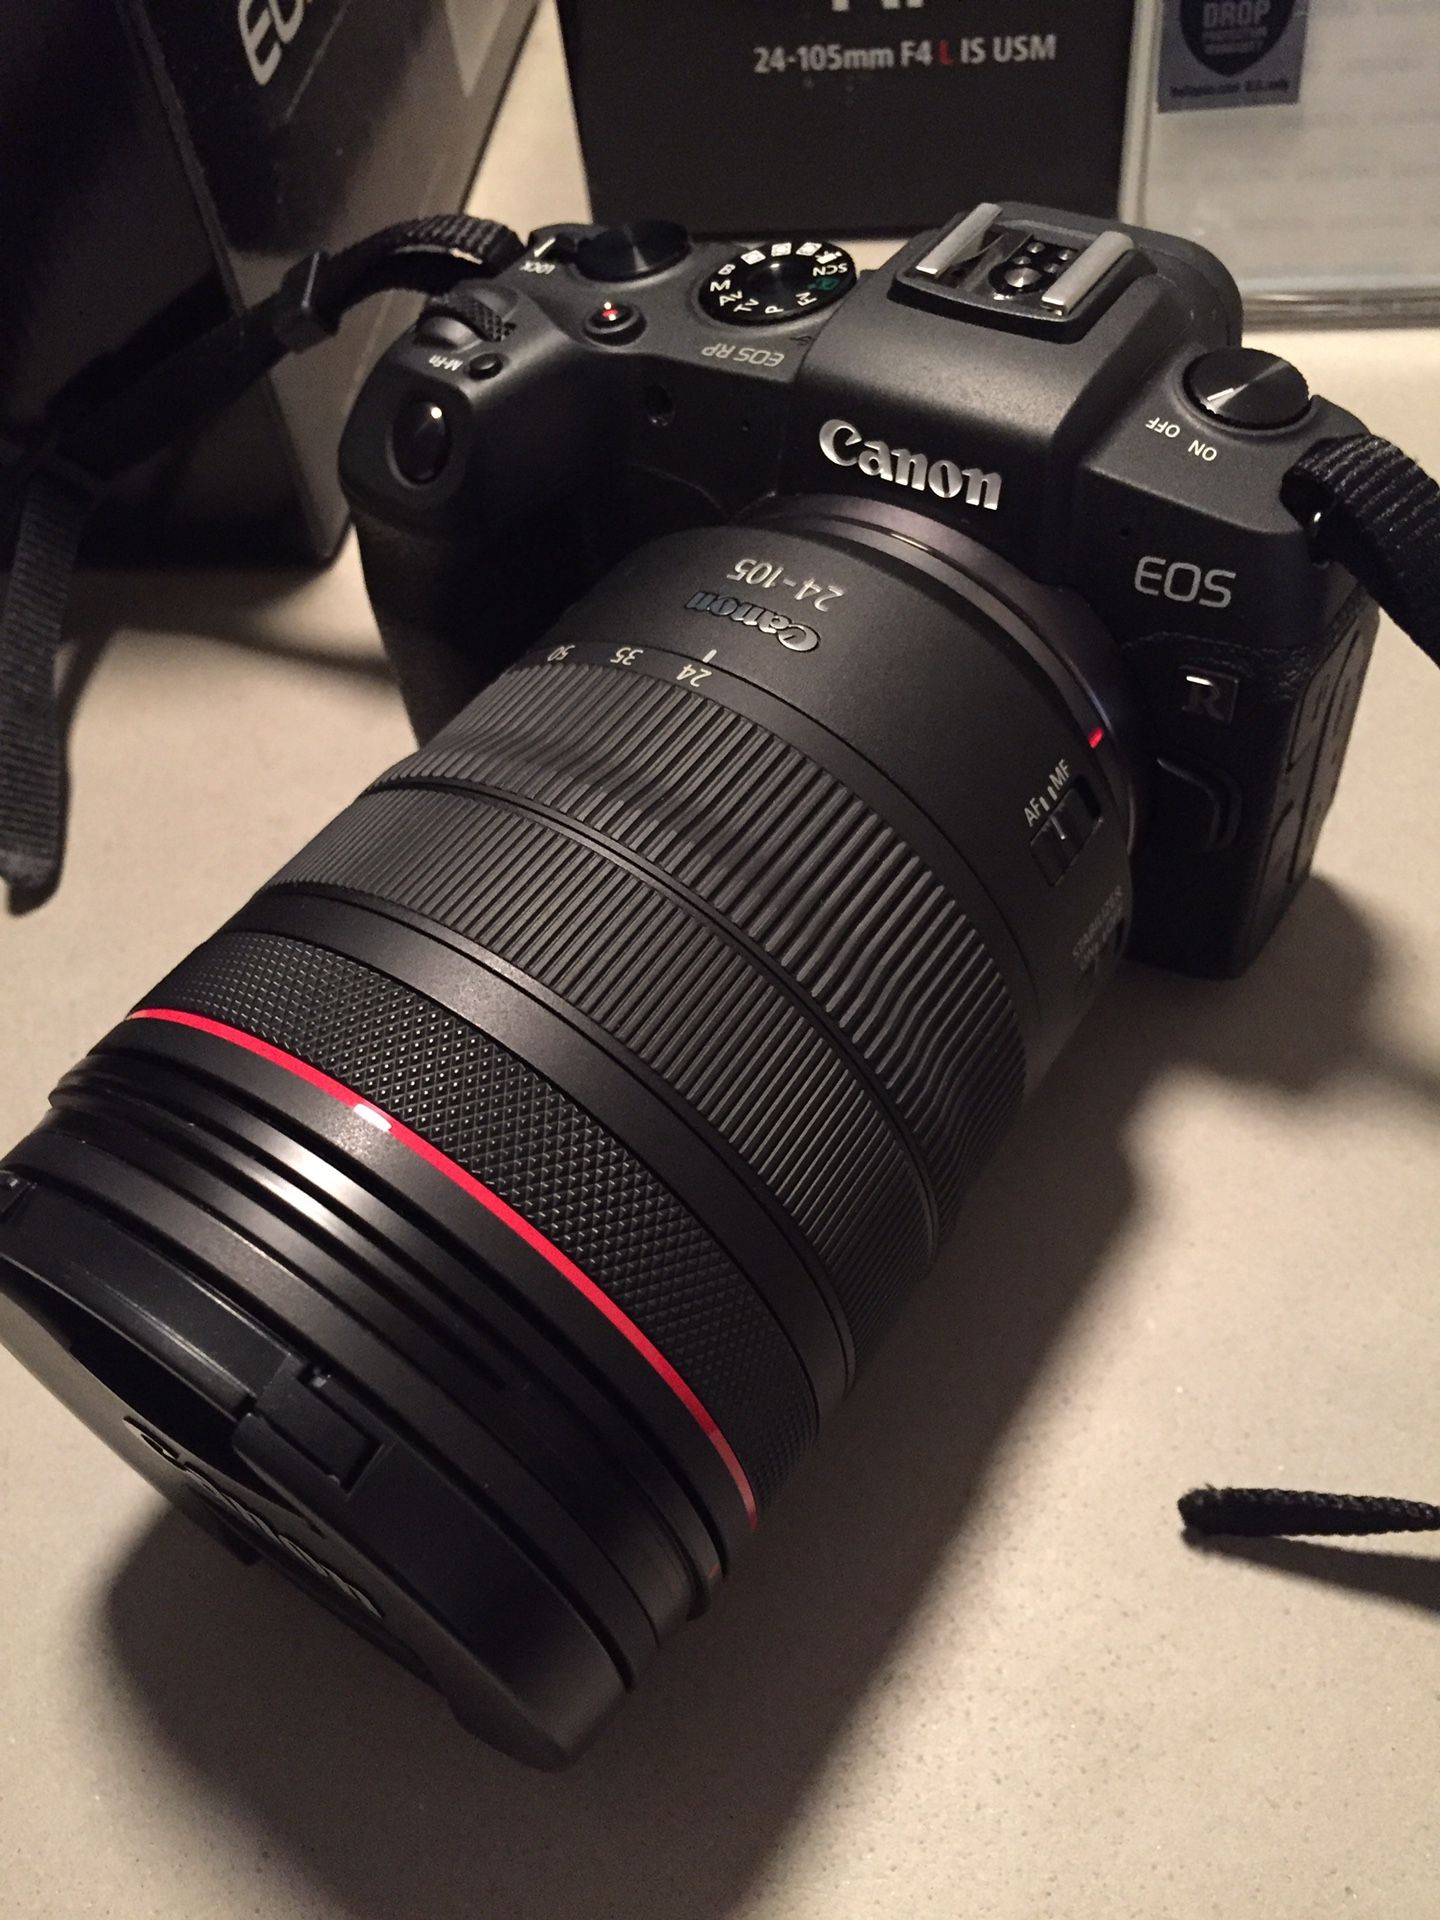 Canon EOS RP with RF f4 24-105 mm lens